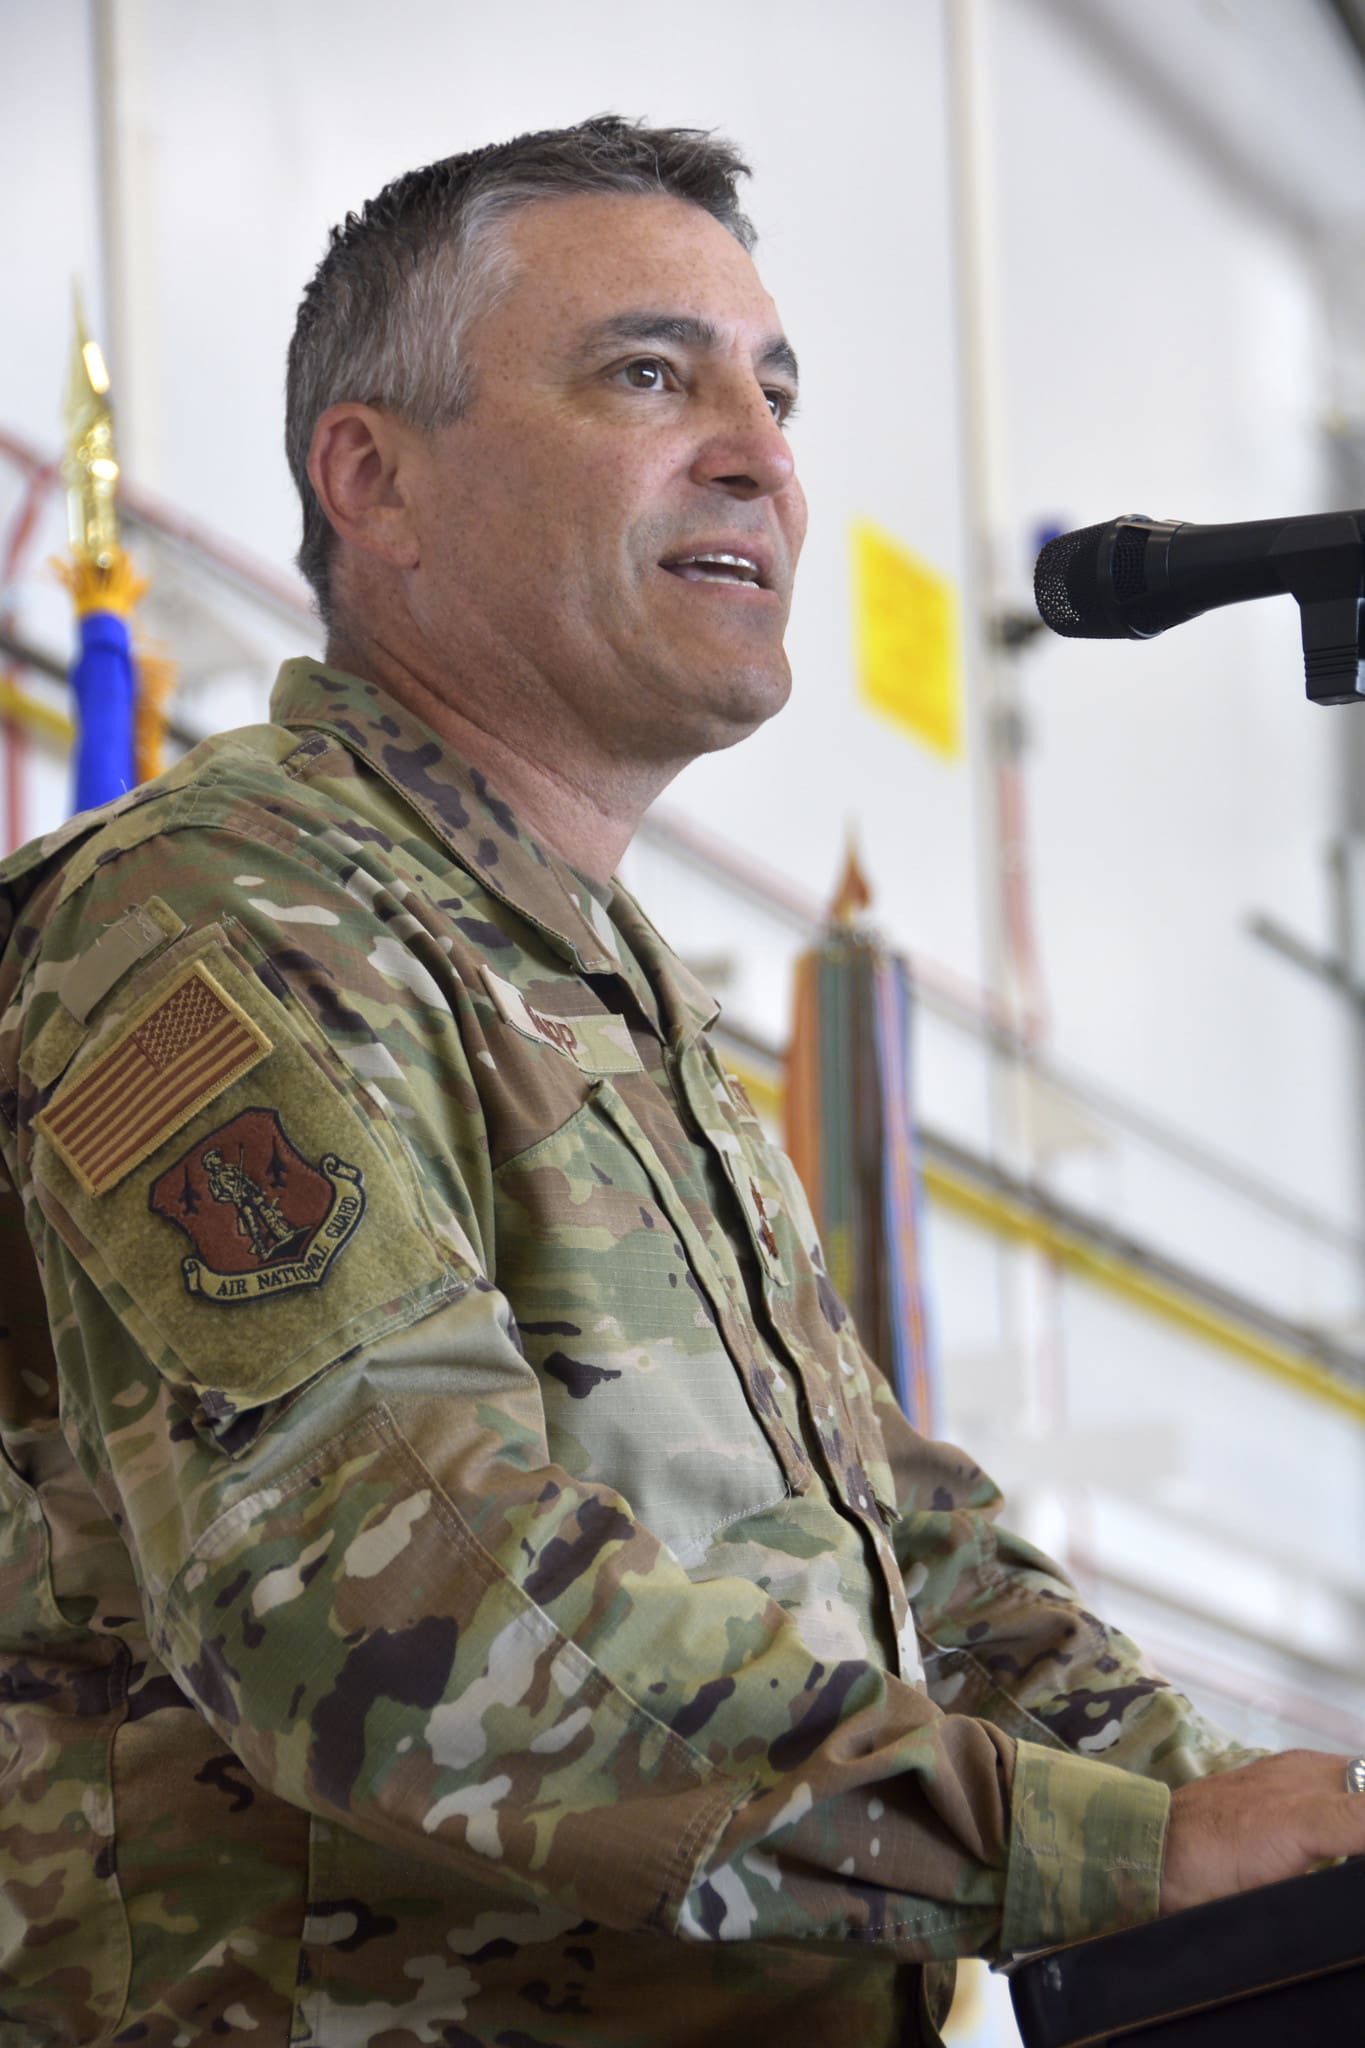 Maj. Gen. Paul Knapp, Wisconsin’s adjutant general, speaks during a welcome home ceremony for the Wisconsin Army National Guard’s 157th Maneuver Enhancement Brigade July 29 at the 115th Fighter Wing in Madison, Wis. The 157th returned from a nine-month deployment to Djibouti, Africa in support of Combined Joint Task Force-Horn of Africa, which conducts operations to enhance partner nation capacity, promote regional stability, dissuade conflict, and protect U.S. and coalition interests. Wisconsin Department of Military Affairs photo by Vaughn R. Larson